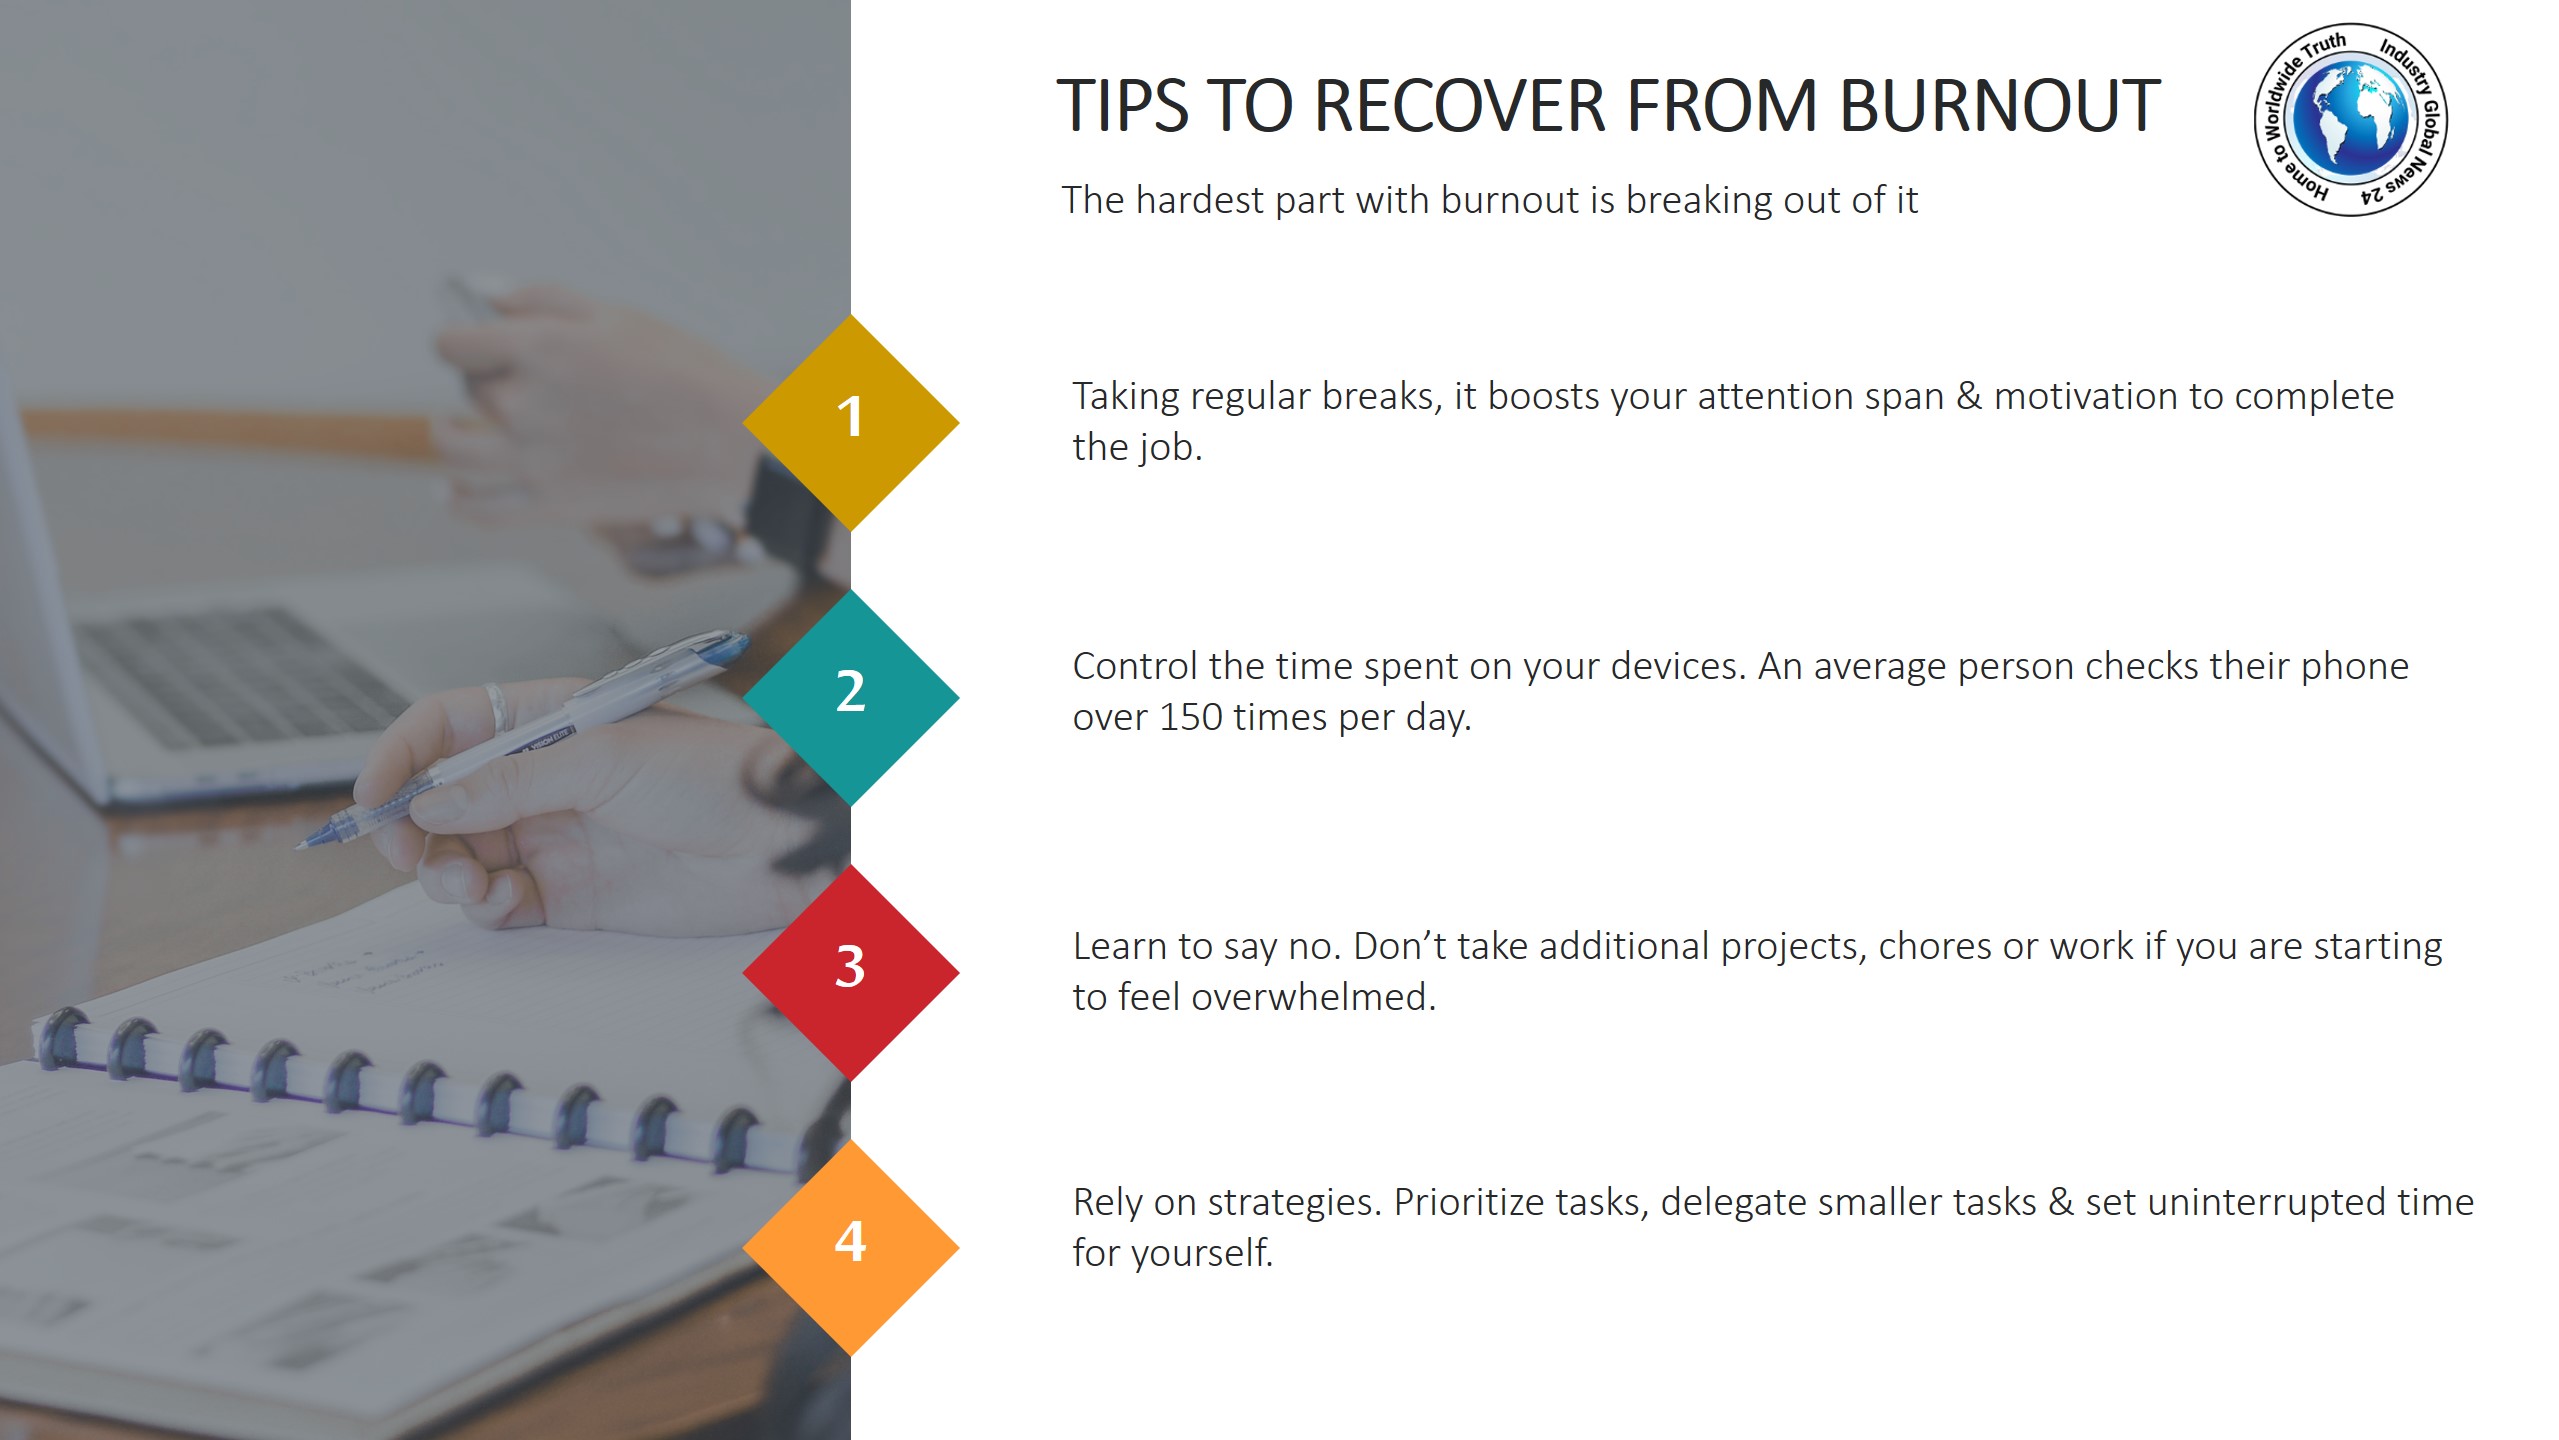 Tips to recover from burnout